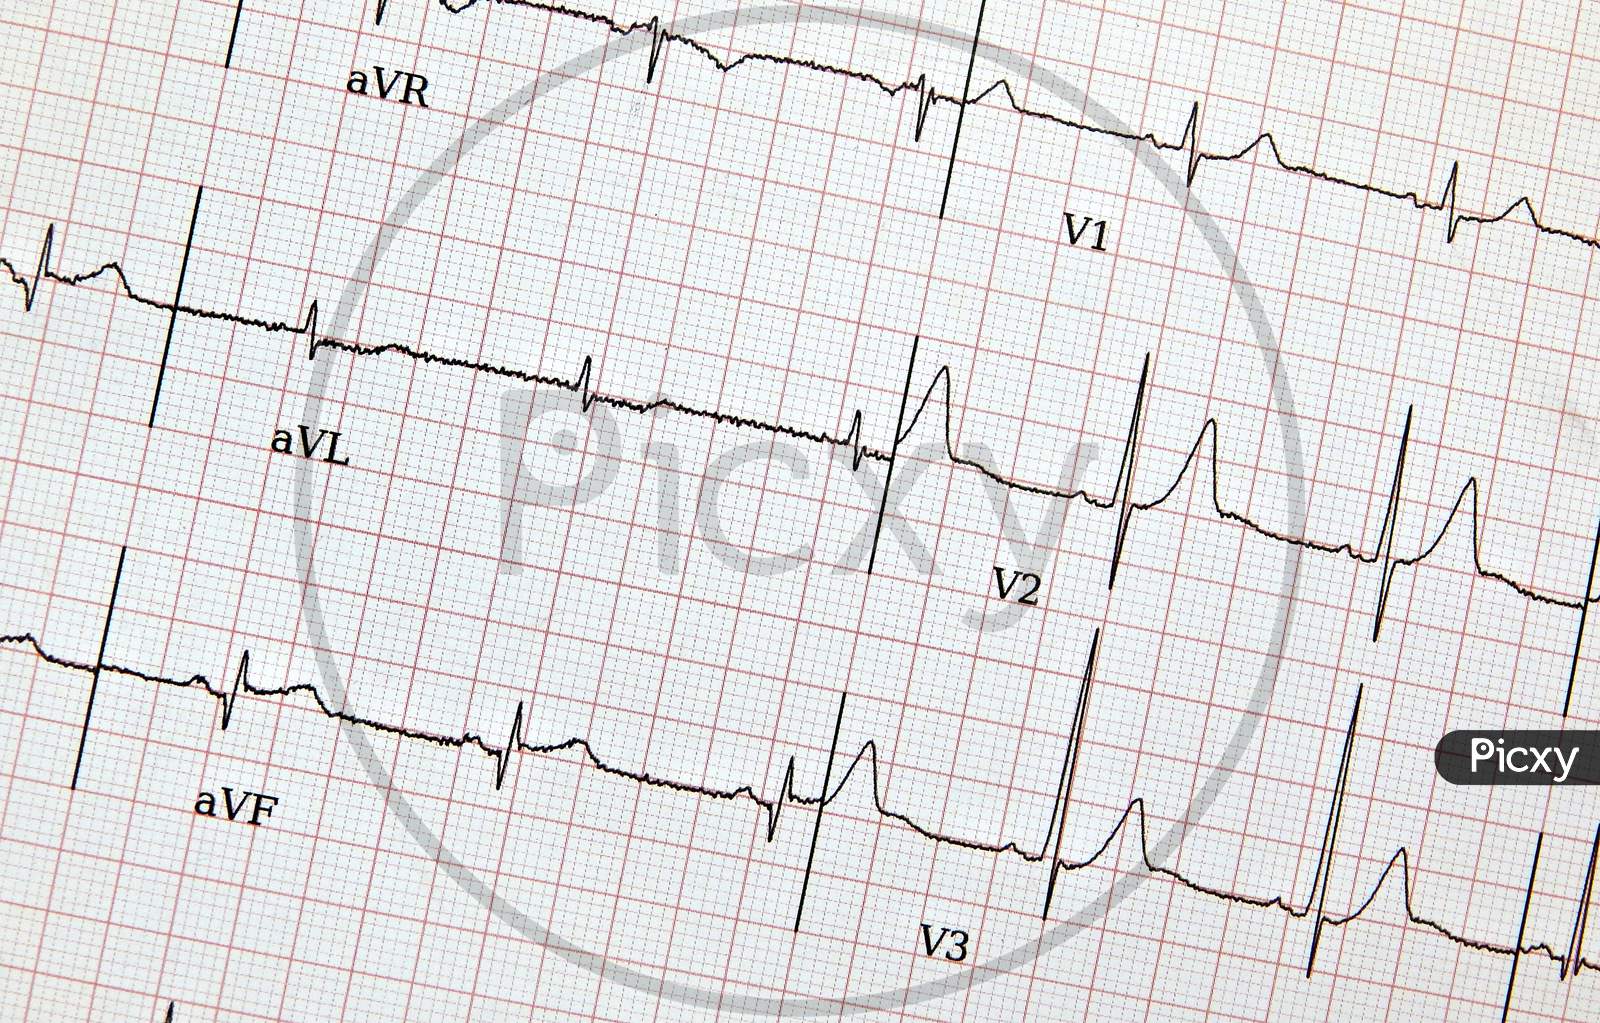 View Of Ecg Or Heart Beat Or Health Details Print Out Report Of Patient